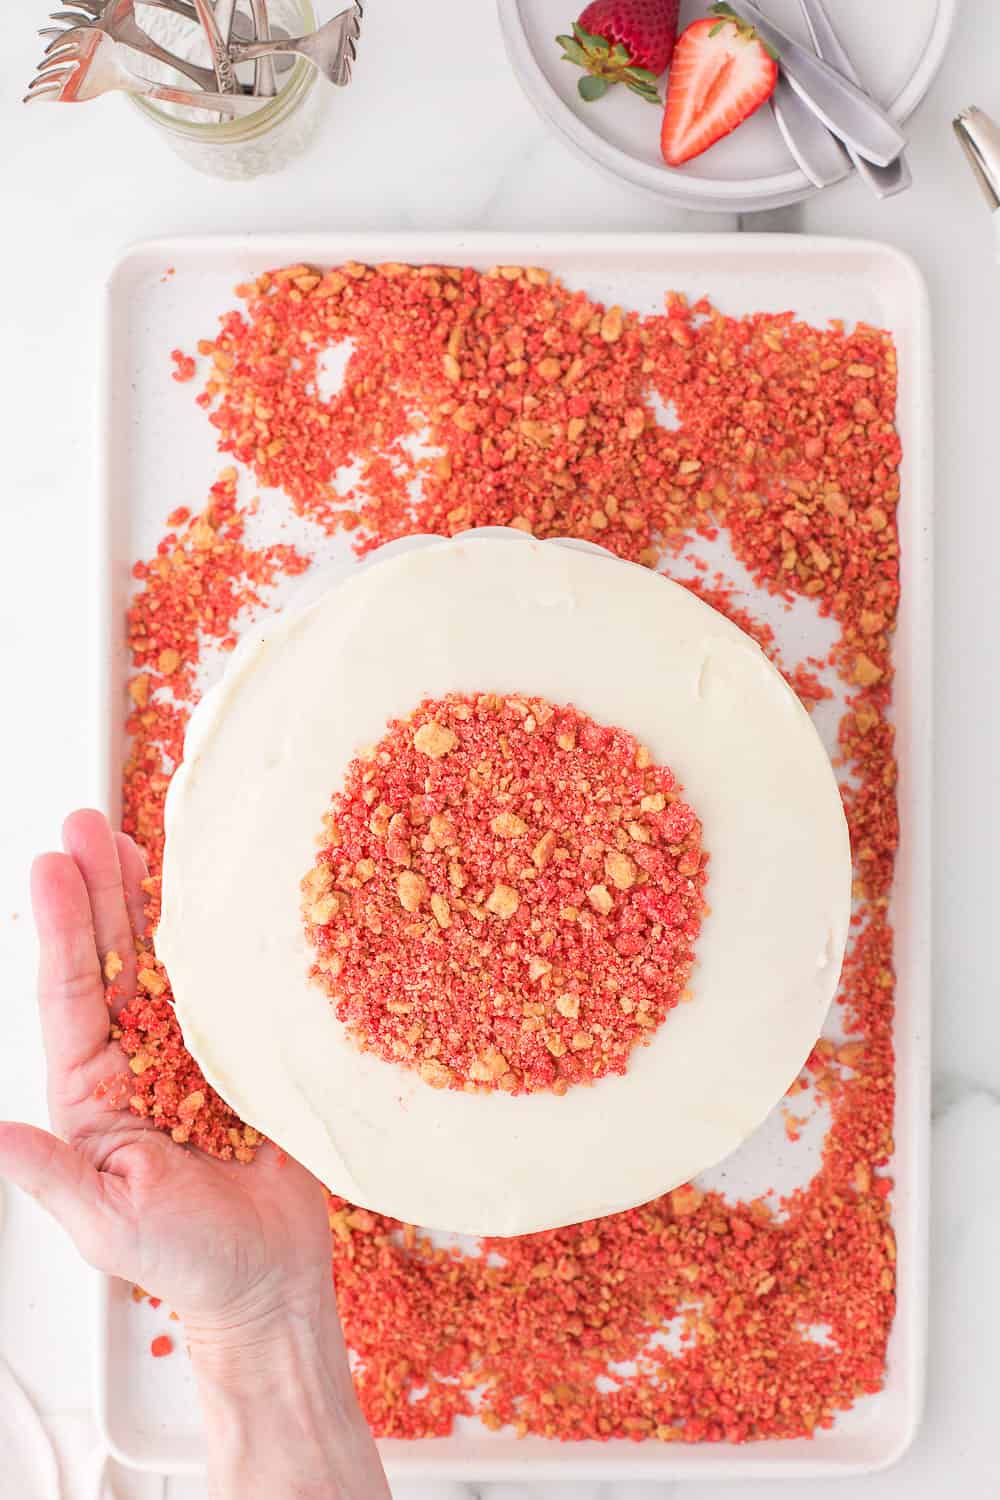 adding strawberry crunch to top of frosted cake